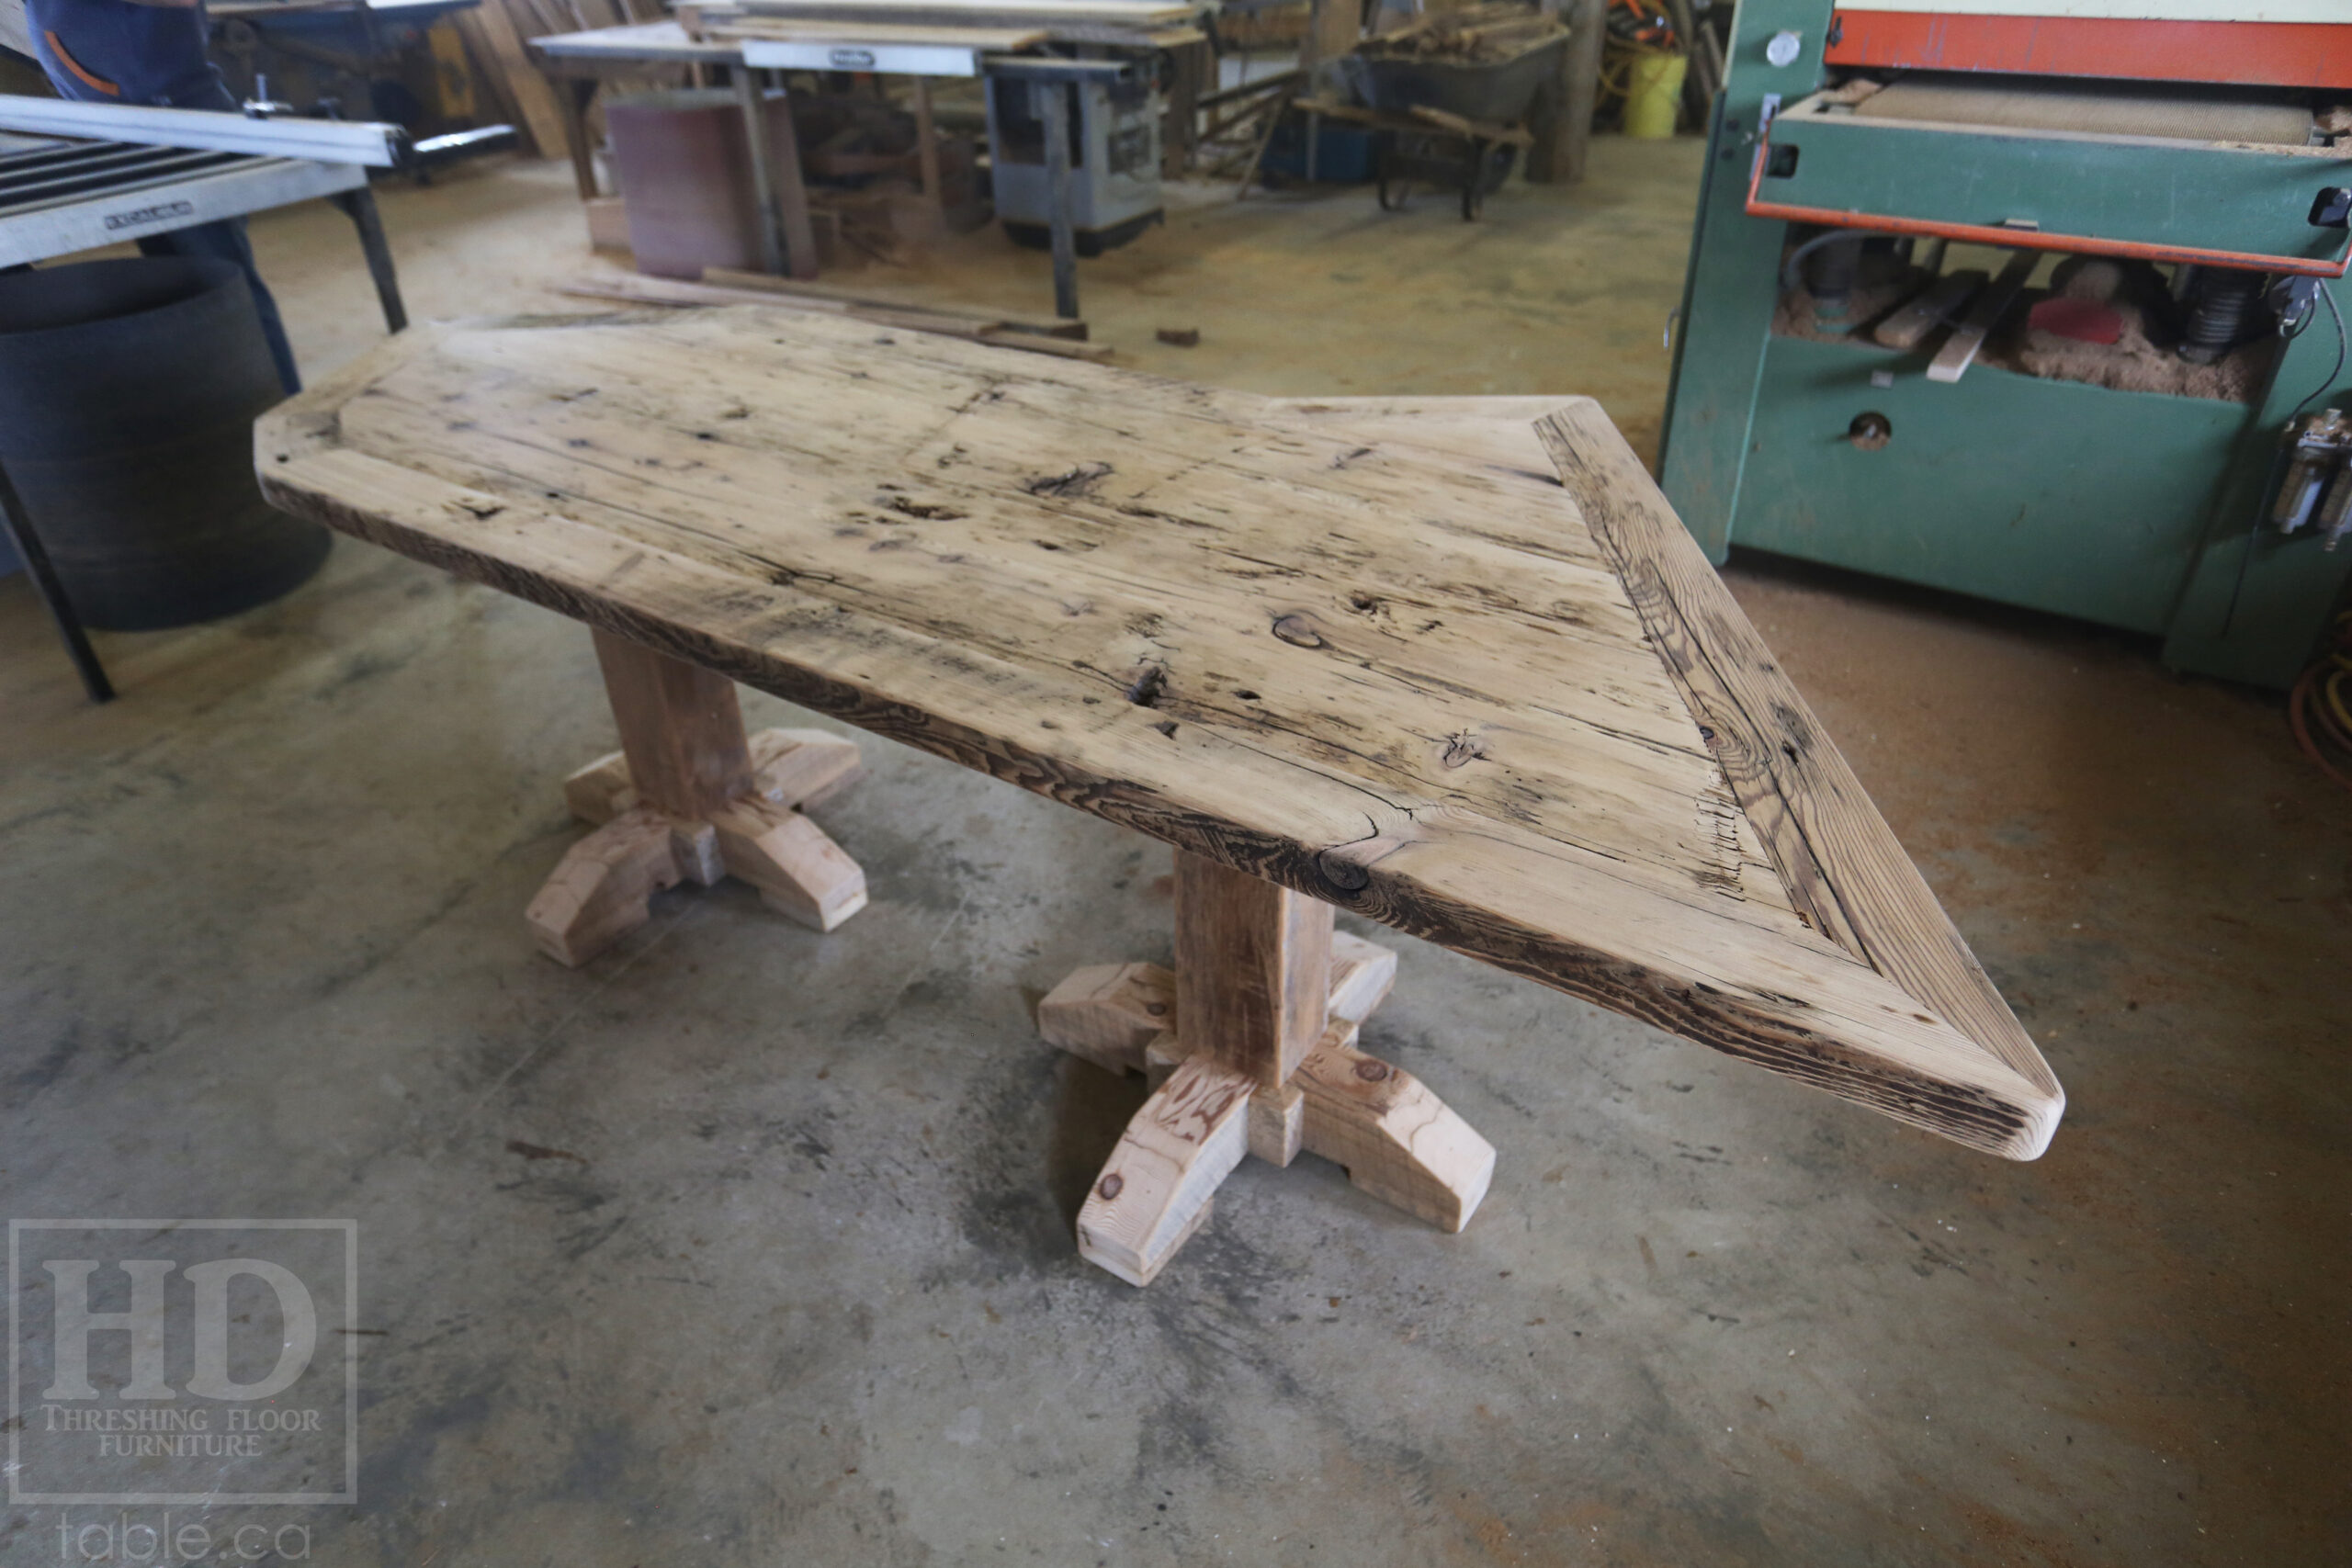 Custom Ontario Barnwood Desk – Barn Beam Posts – Modified Shape to Accommodate a Unique Space -Reclaimed Hemlock Threshing Floor 2” Top – Original edges & distressing maintained  – www.table.ca